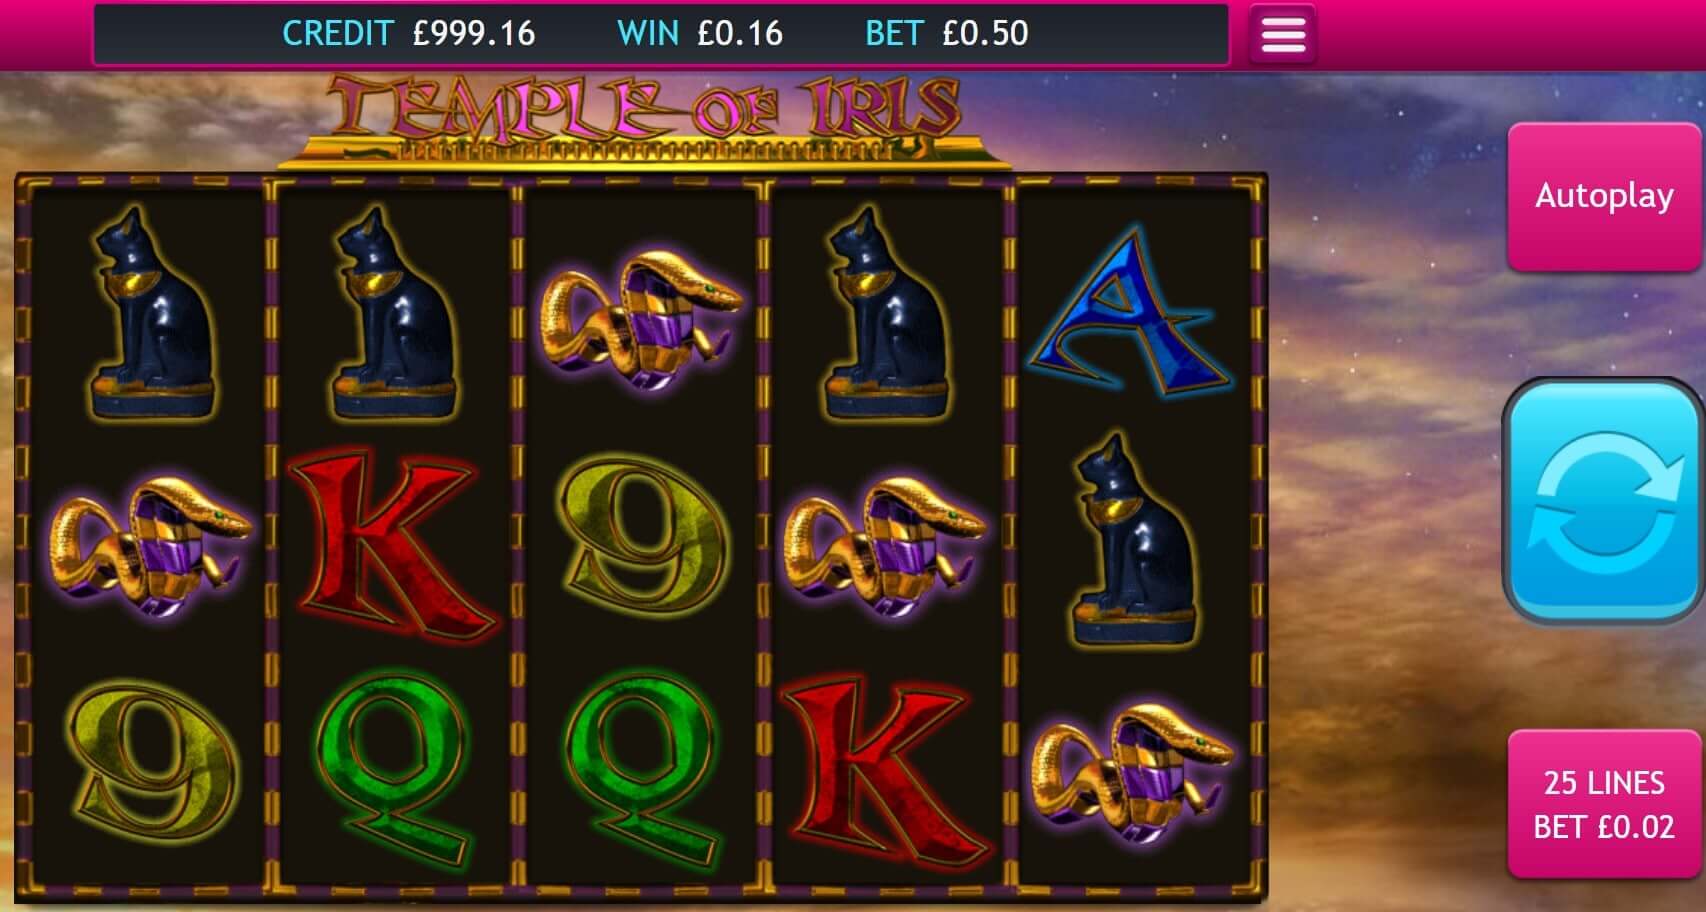 Temple of Iris Free Spins